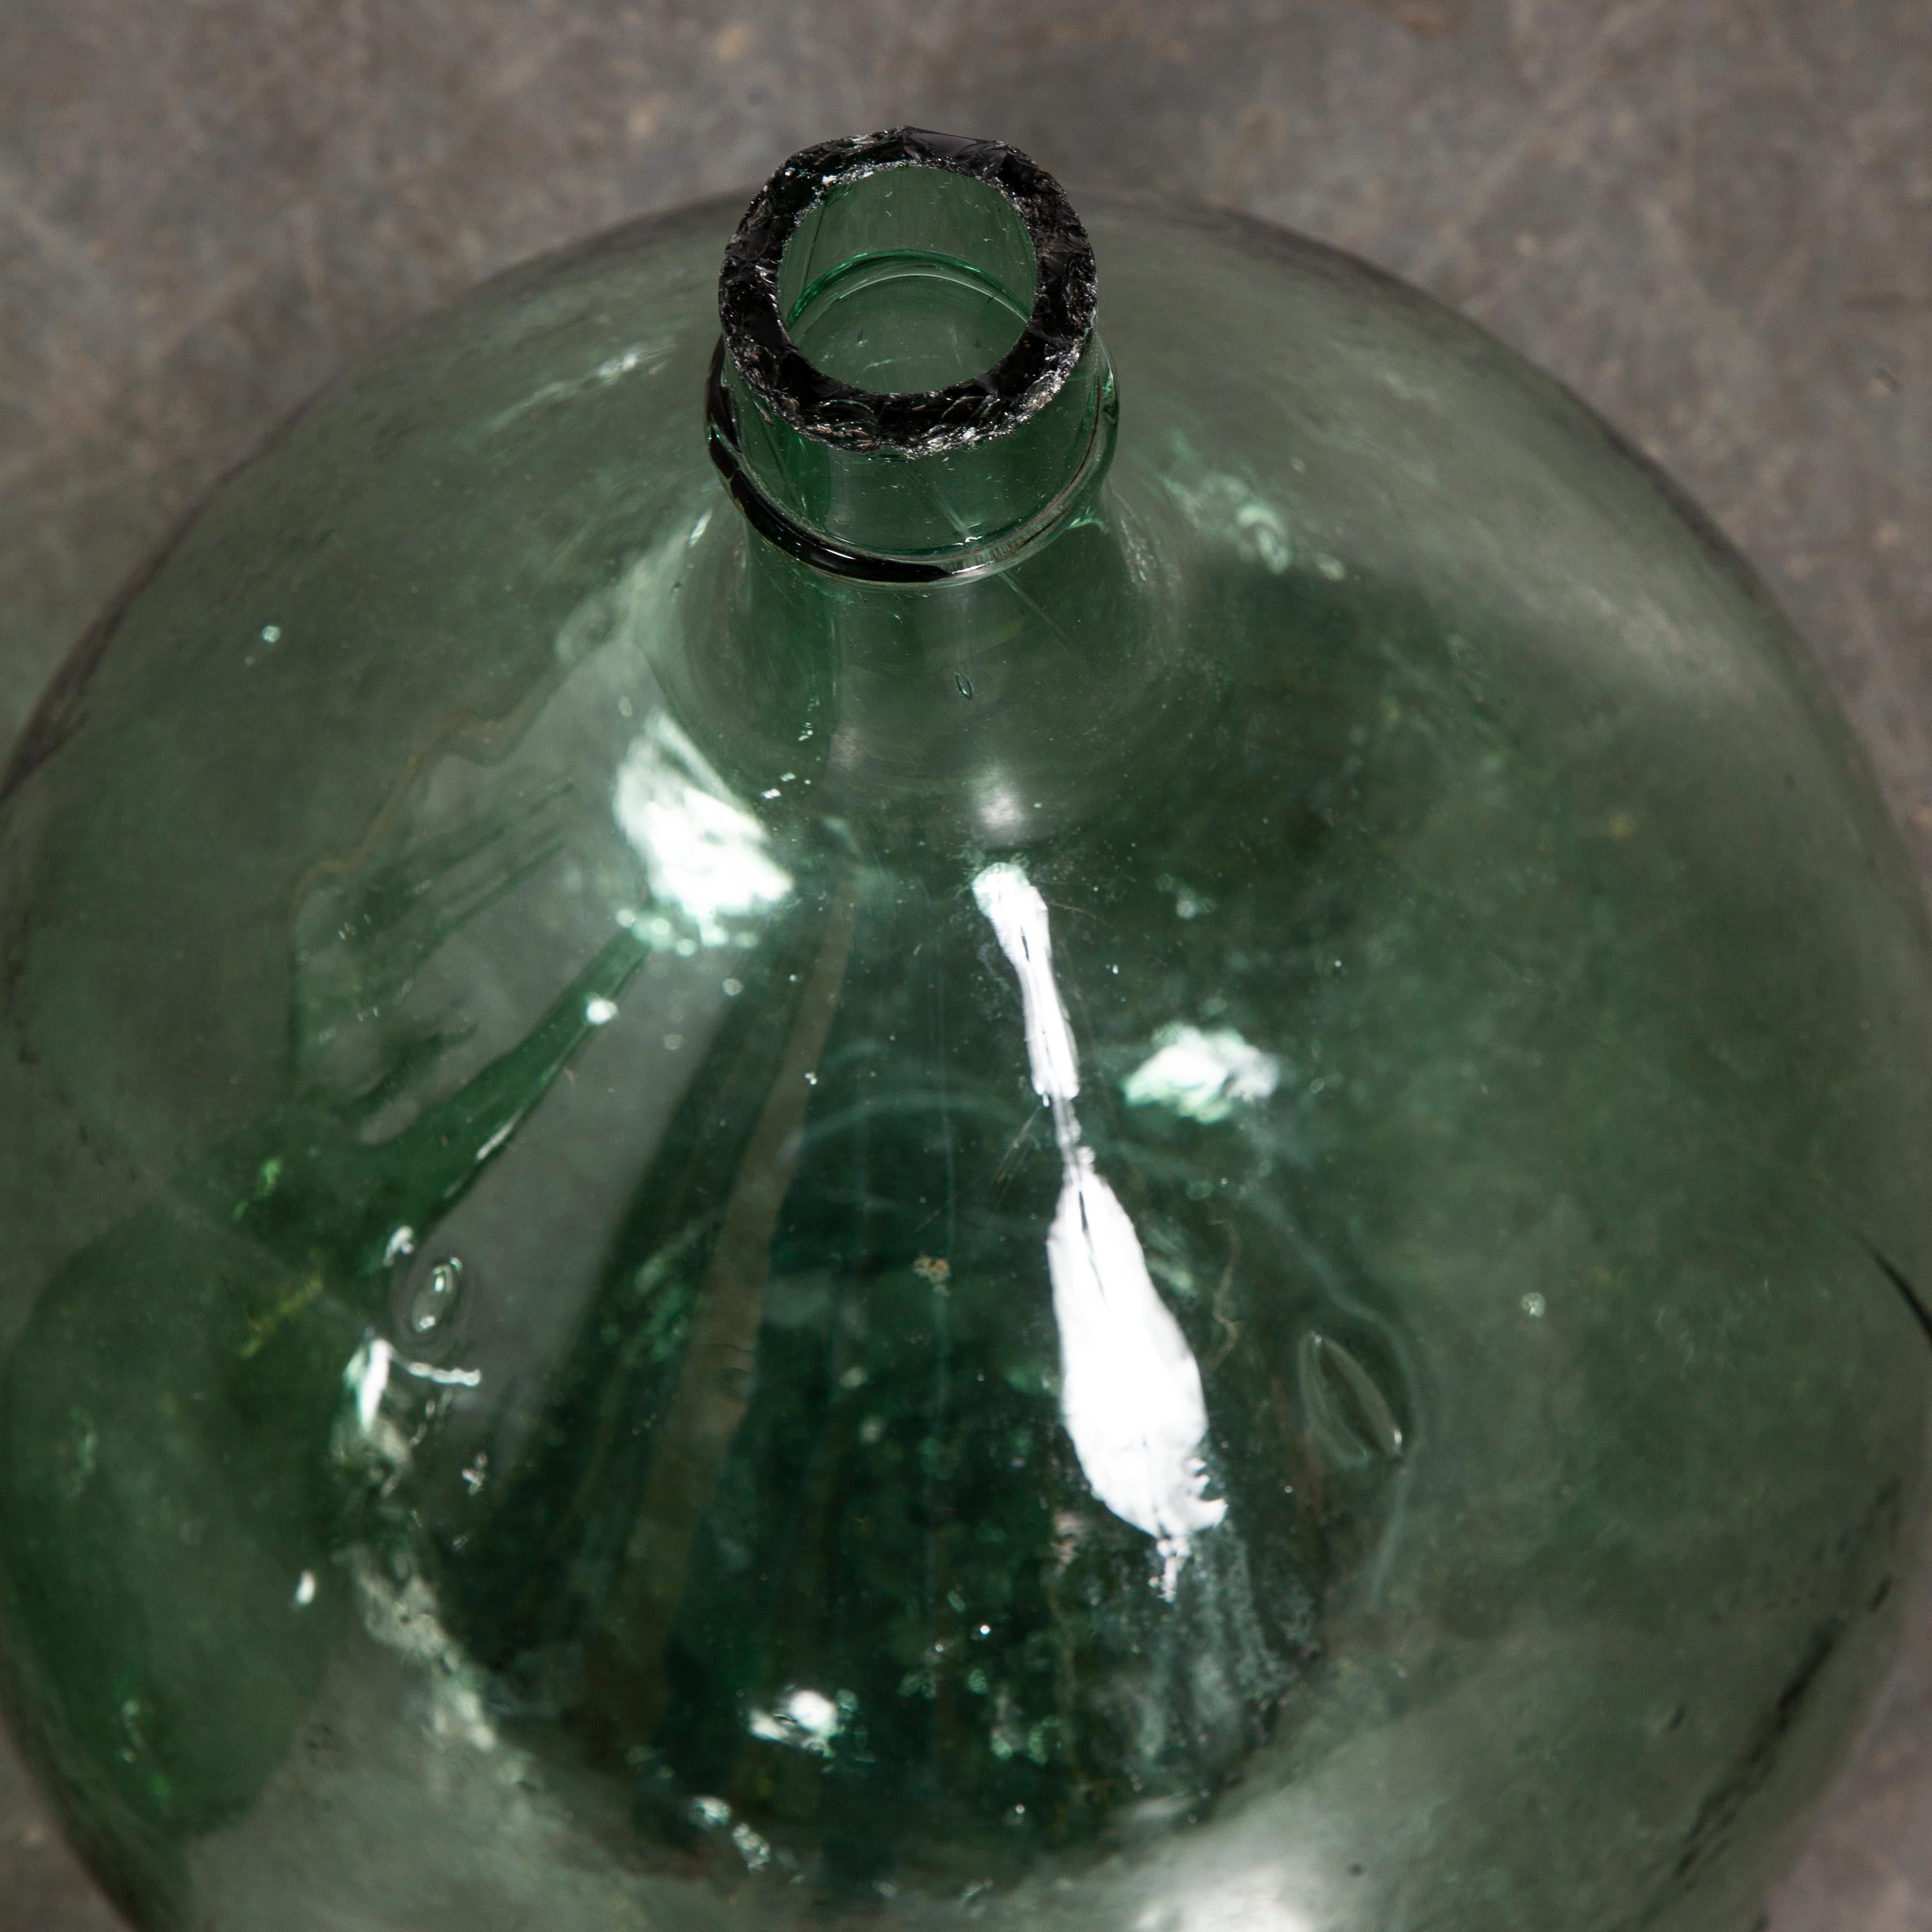 Vintage French Glass Demijohn – Pair of Demijohn (Model 957.7)
Vintage French Glass Demijohns. Pair of mouthblown glass demijohns used as a traditional containers mainly for wine storage and transport. Our demijohns have been carefully cleaned.